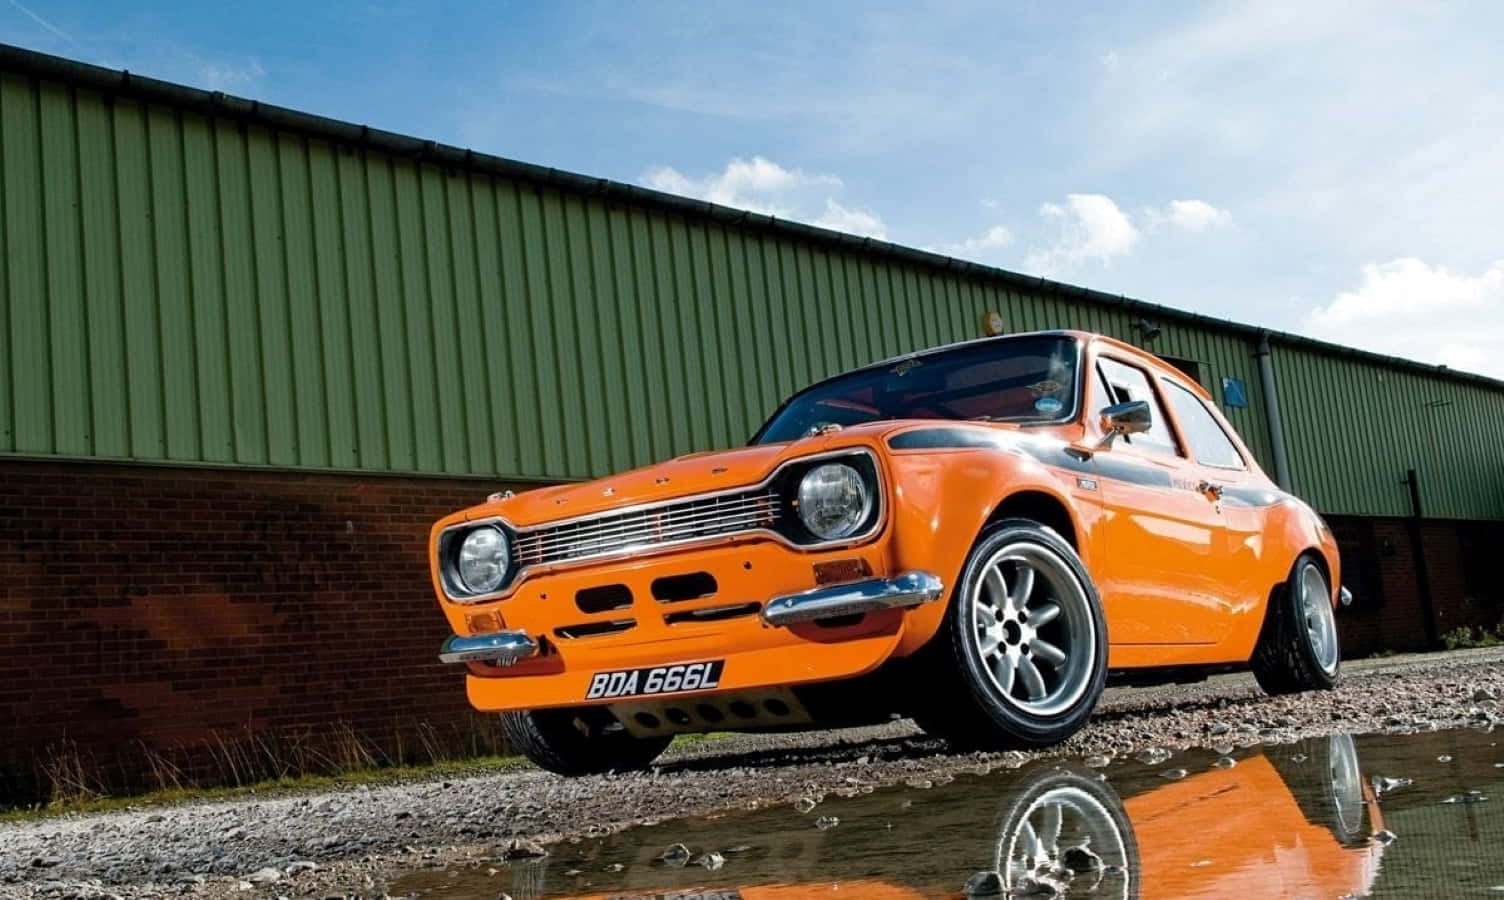 Classic Ford Escort in Action Wallpaper